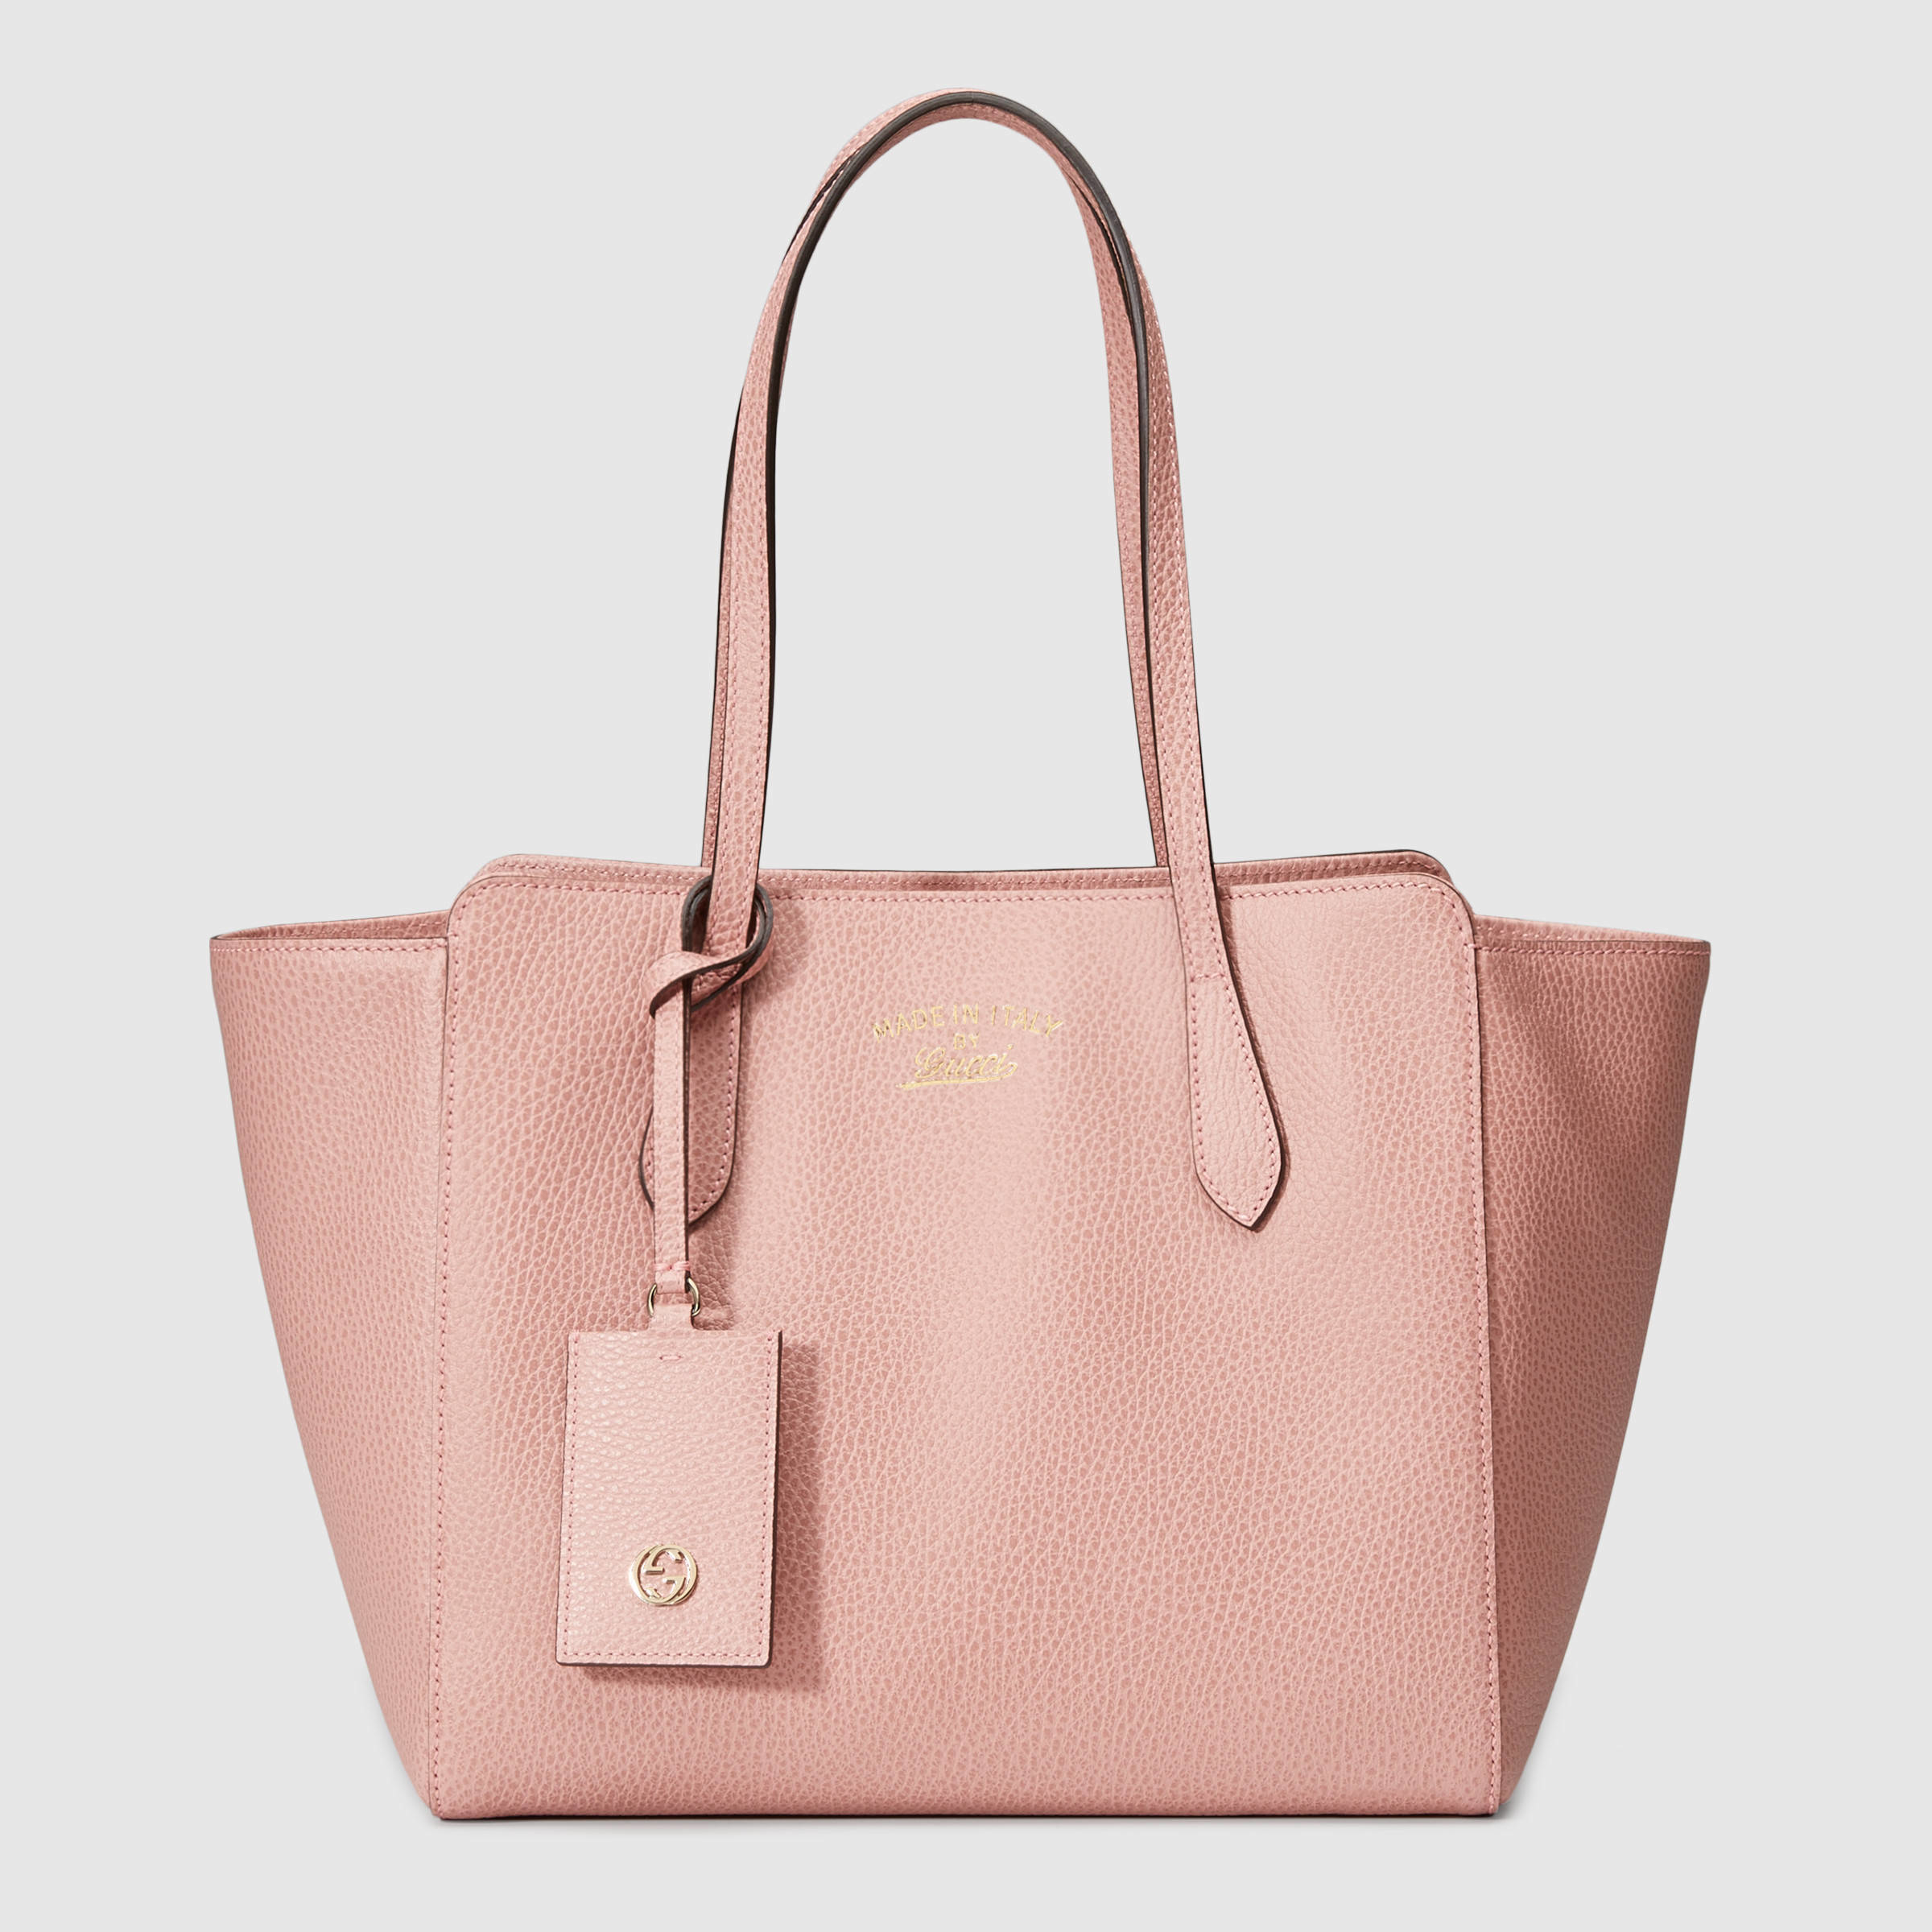 Gucci Swing Small Leather Tote in Soft Pink Leather (Blue) - Lyst